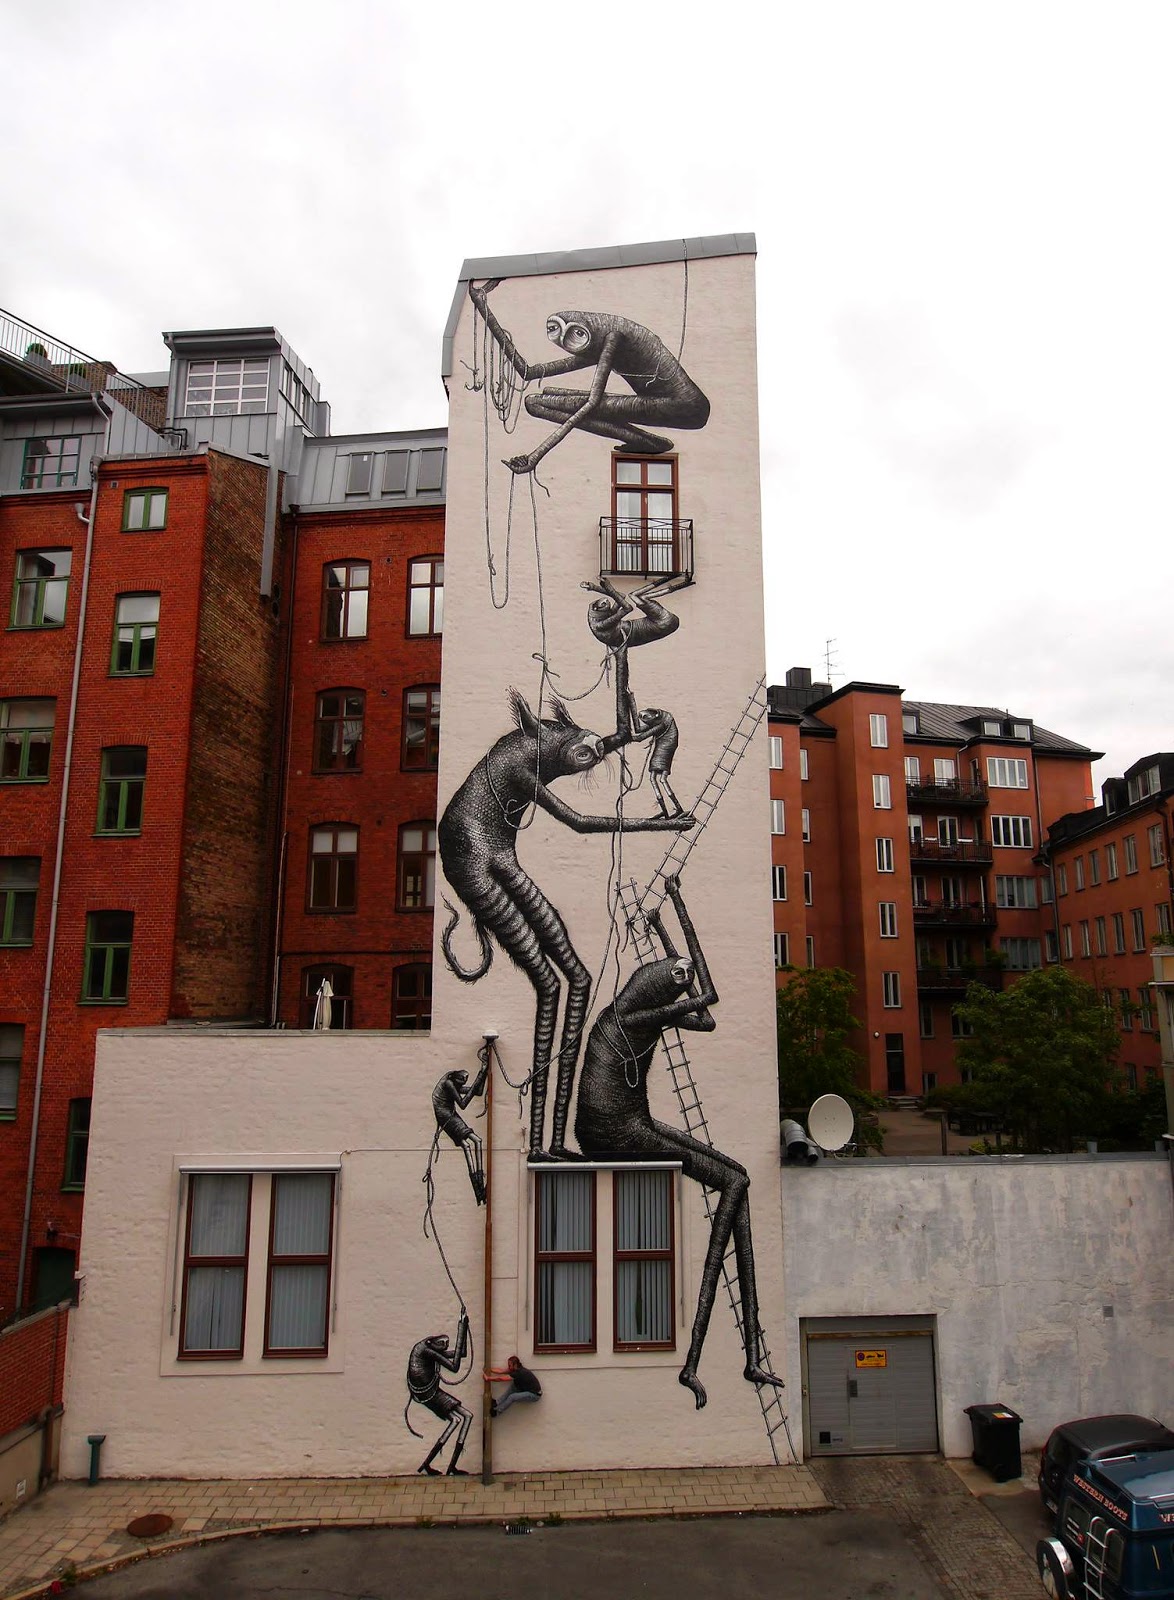 Phlegm is currently in Sweden where he just finished working on this new piece somewhere on the streets of Malmö.